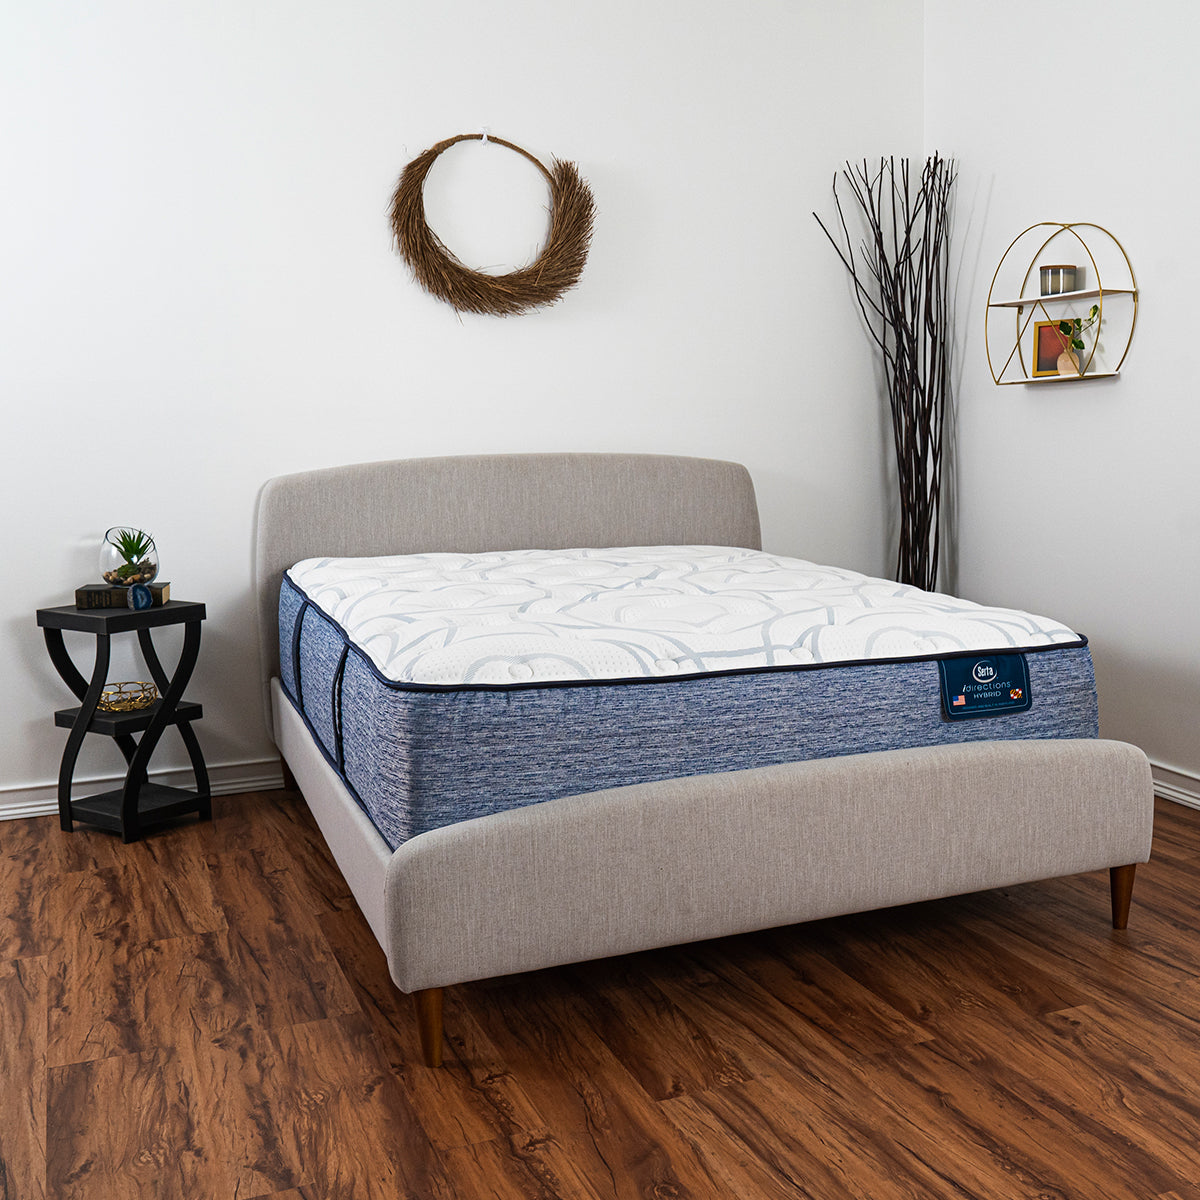 Serta iDirections X7 Hybrid II Plush Mattress On Bed Frame In Bedroom Angle View